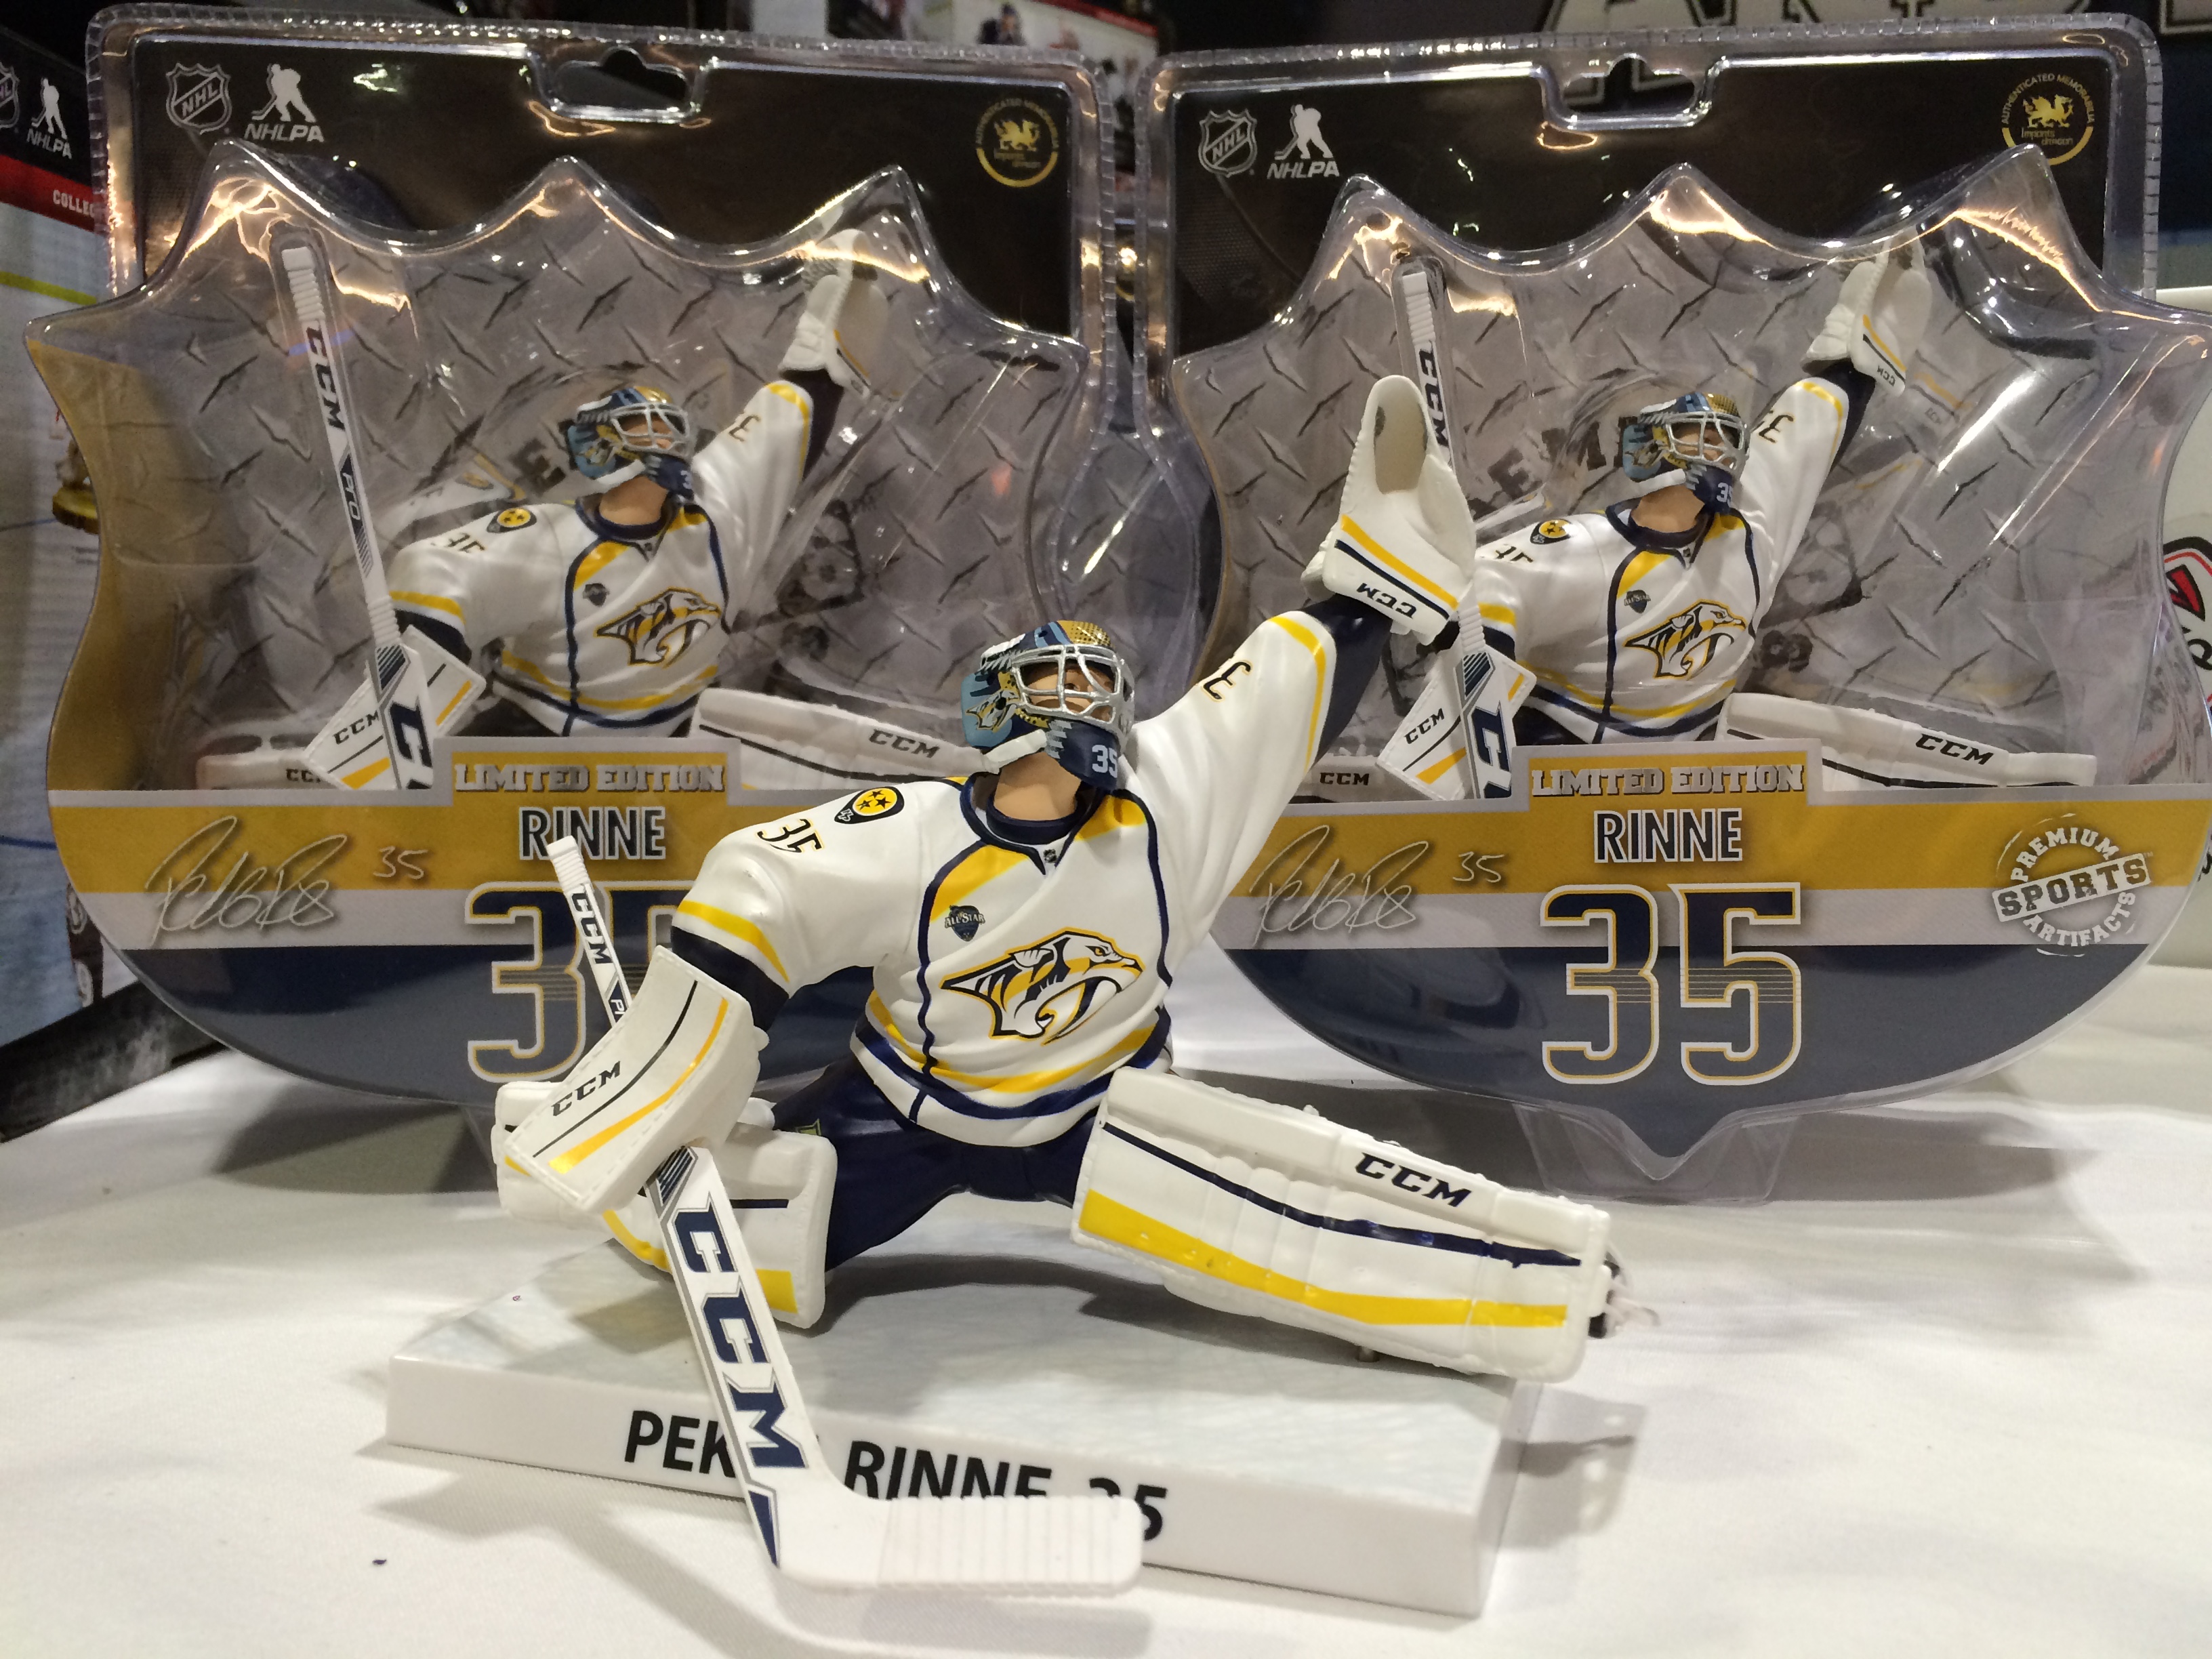 Imports Dragon offers exclusive NHL All-Star Game figures